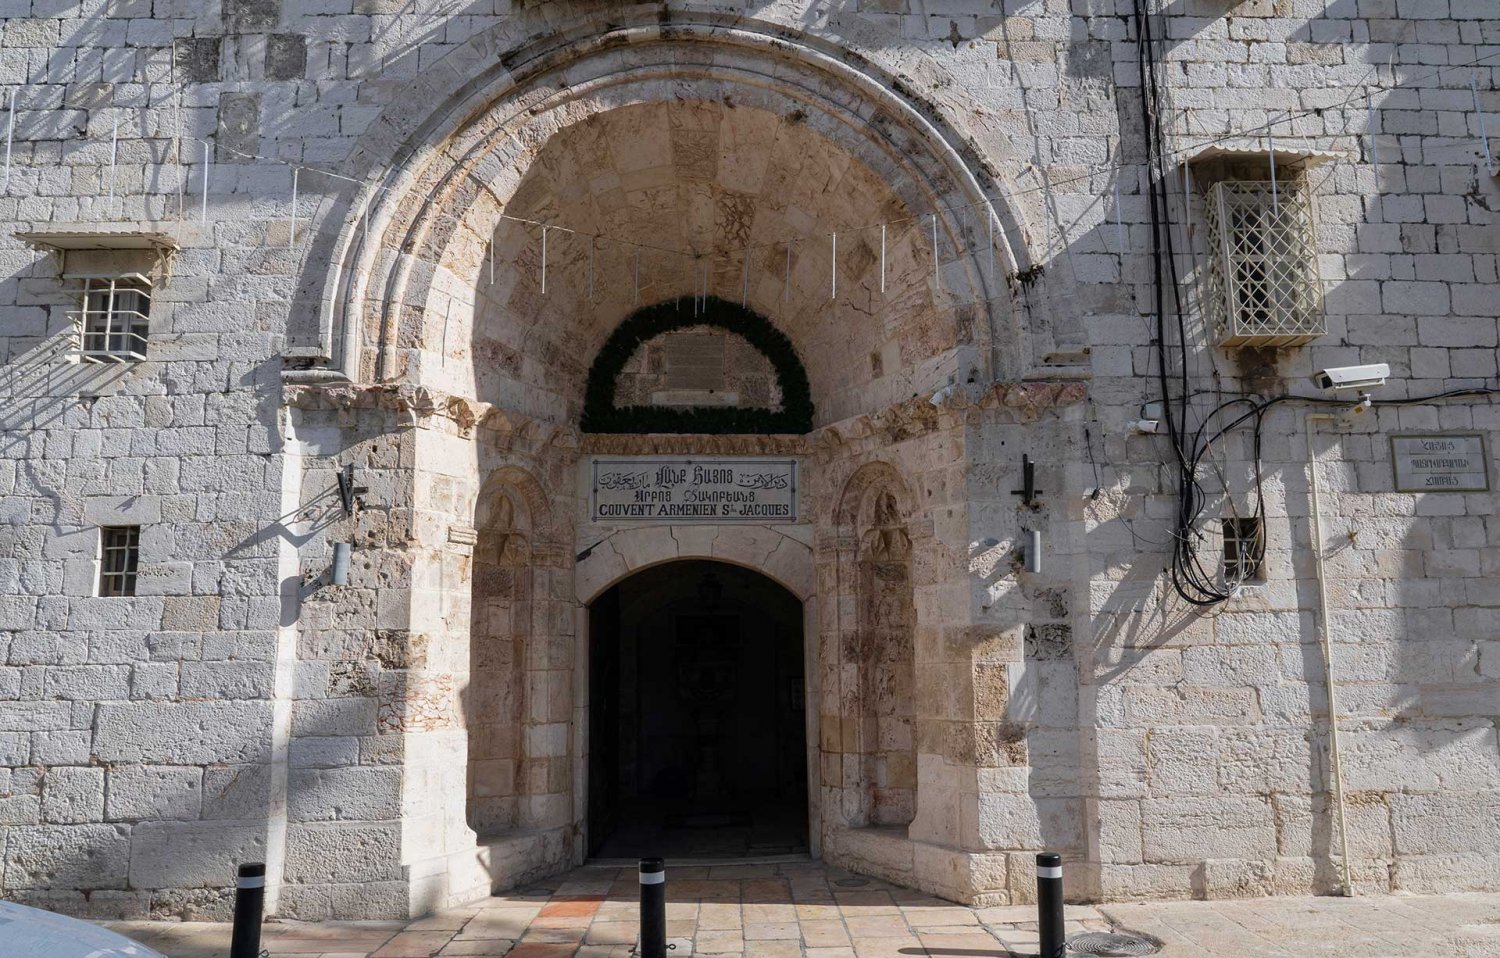 St. James Monastery in the Armenian Quarter of the Old City of Jerusalem